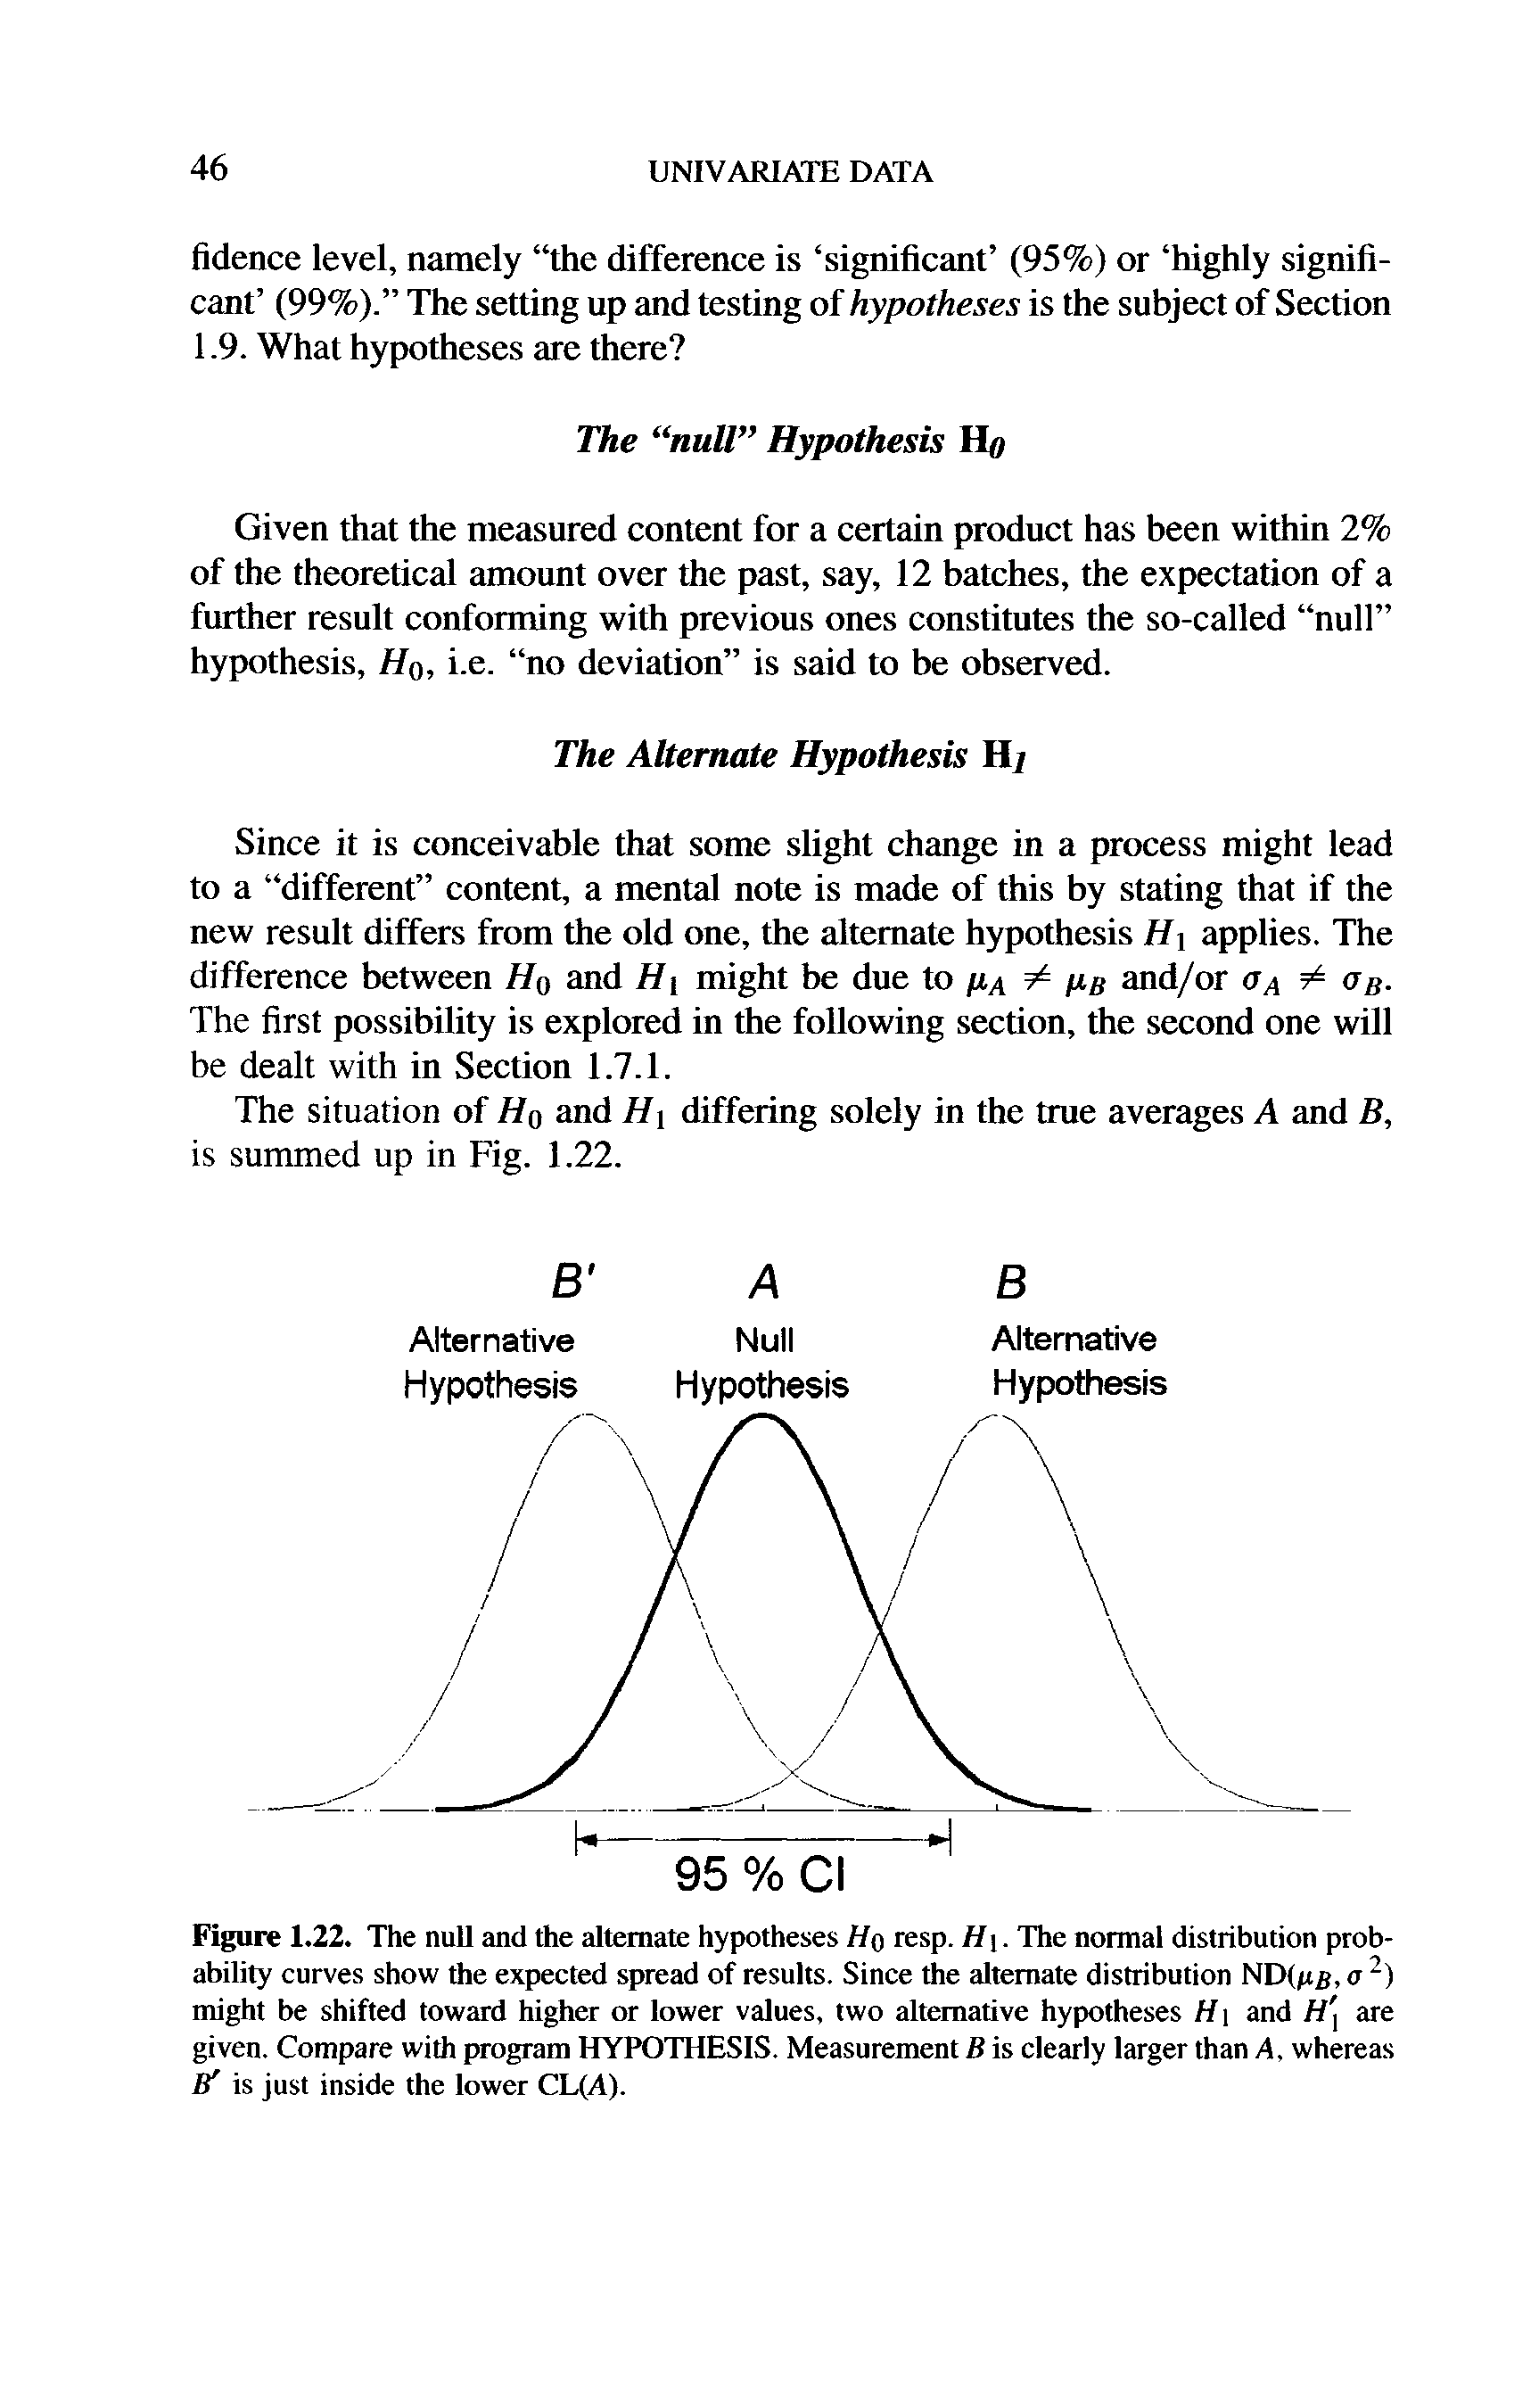 Figure 1.22. The null and the alternate hypotheses Hq resp. Hi. The normal distribution probability curves show the expected spread of results. Since the alternate distribution ND(/tb, a might be shifted toward higher or lower values, two alternative hypotheses Hi and H are given. Compare with program HYPOTHESIS. Measurement B is clearly larger than A, whereas S is just inside the lower CL(A).